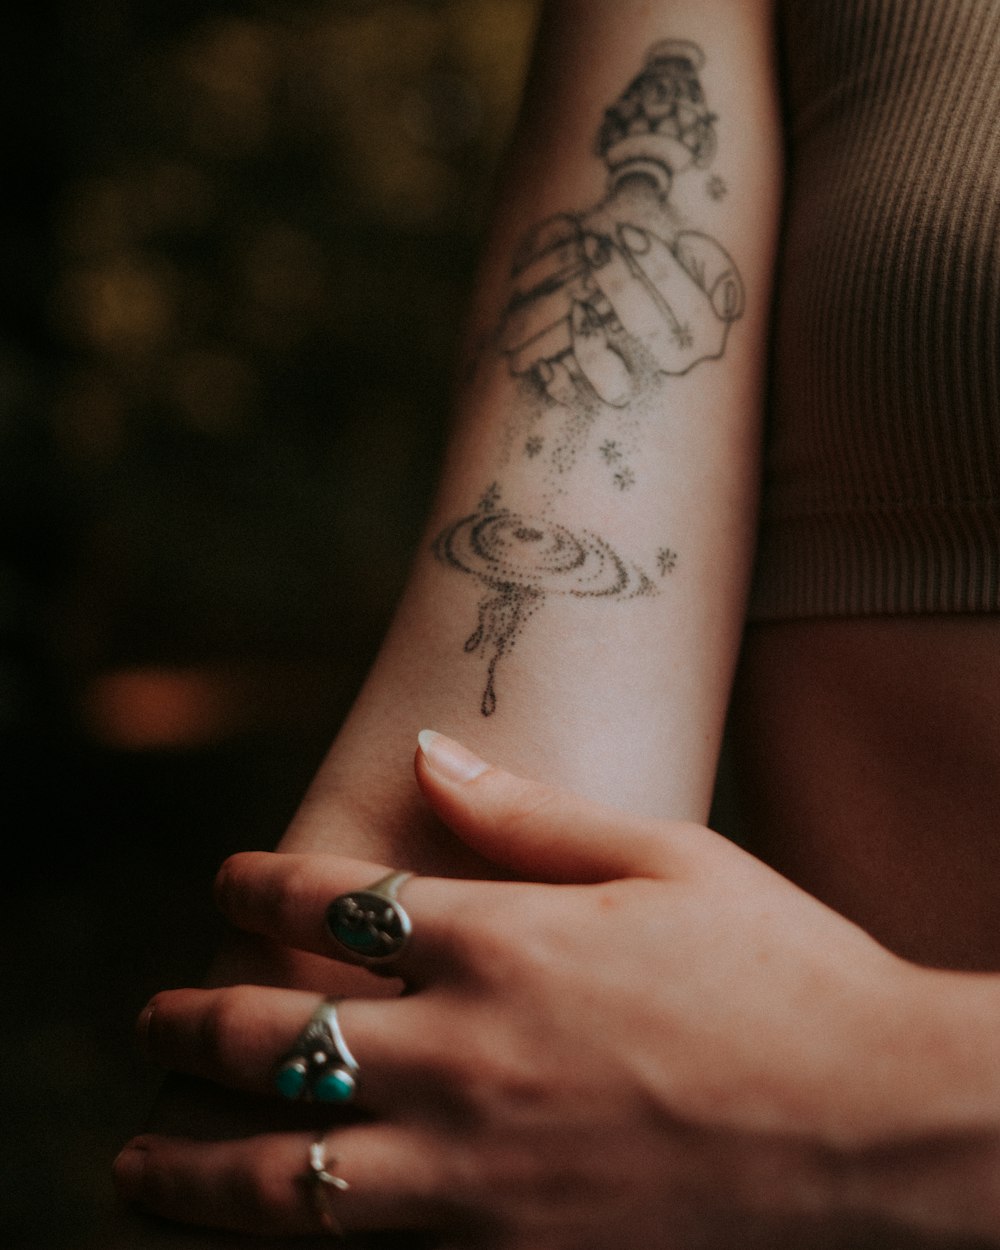 person with black and blue skull tattoo wearing silver ring